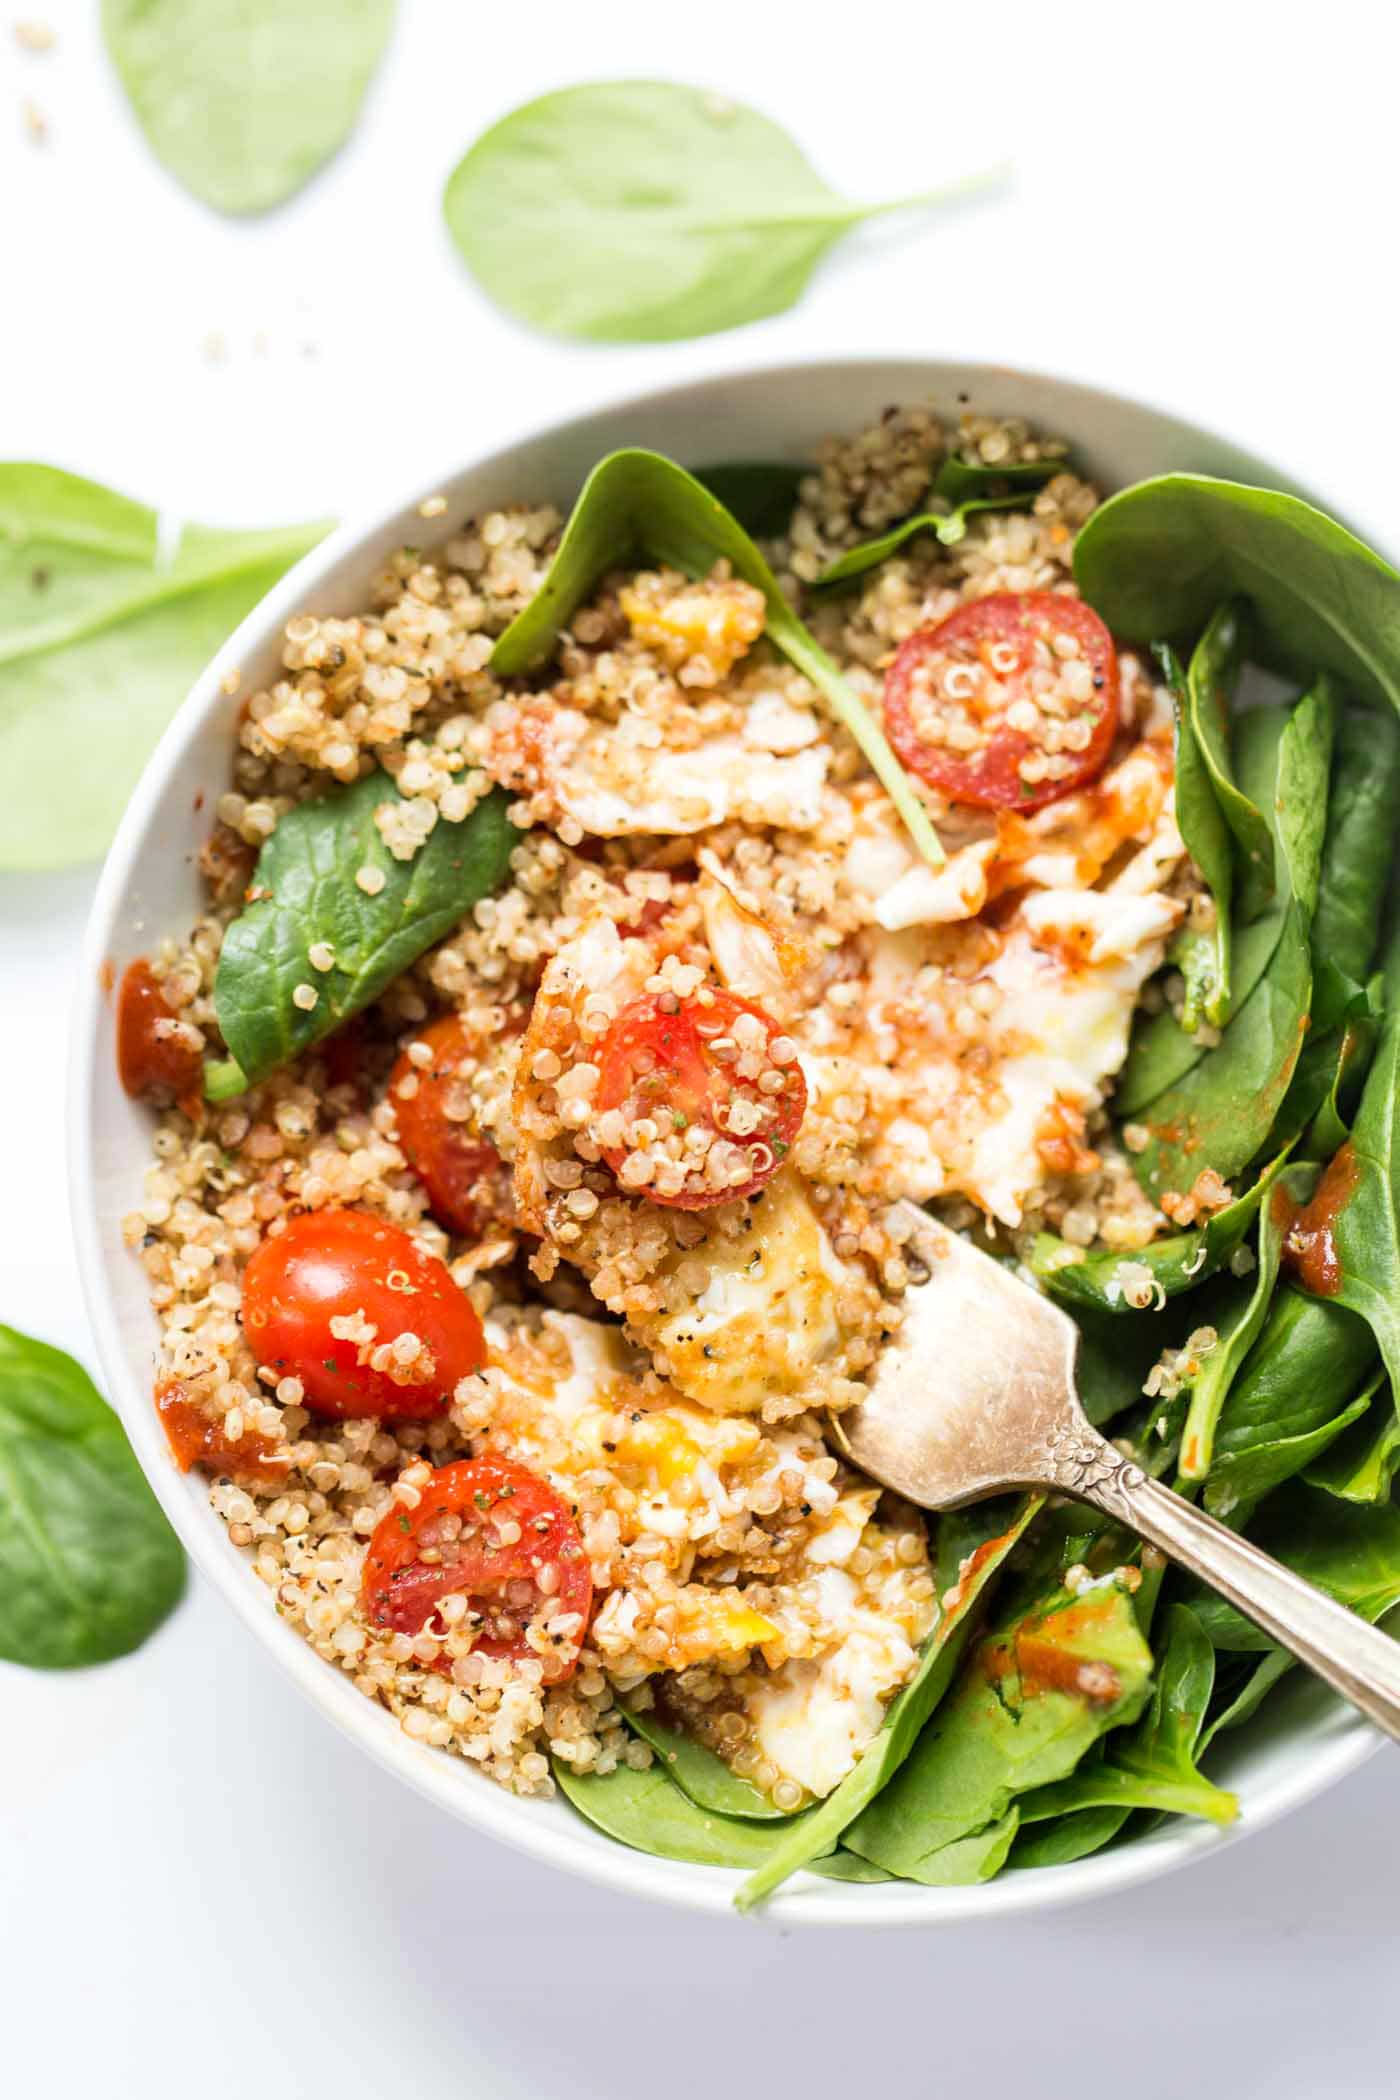 These SAVORY Quinoa Breakfast Bowls take just 5 minutes to make and are packed with healthy ingredients >> spinach, tomatoes and fried eggs make this a protein-packed breakfast!